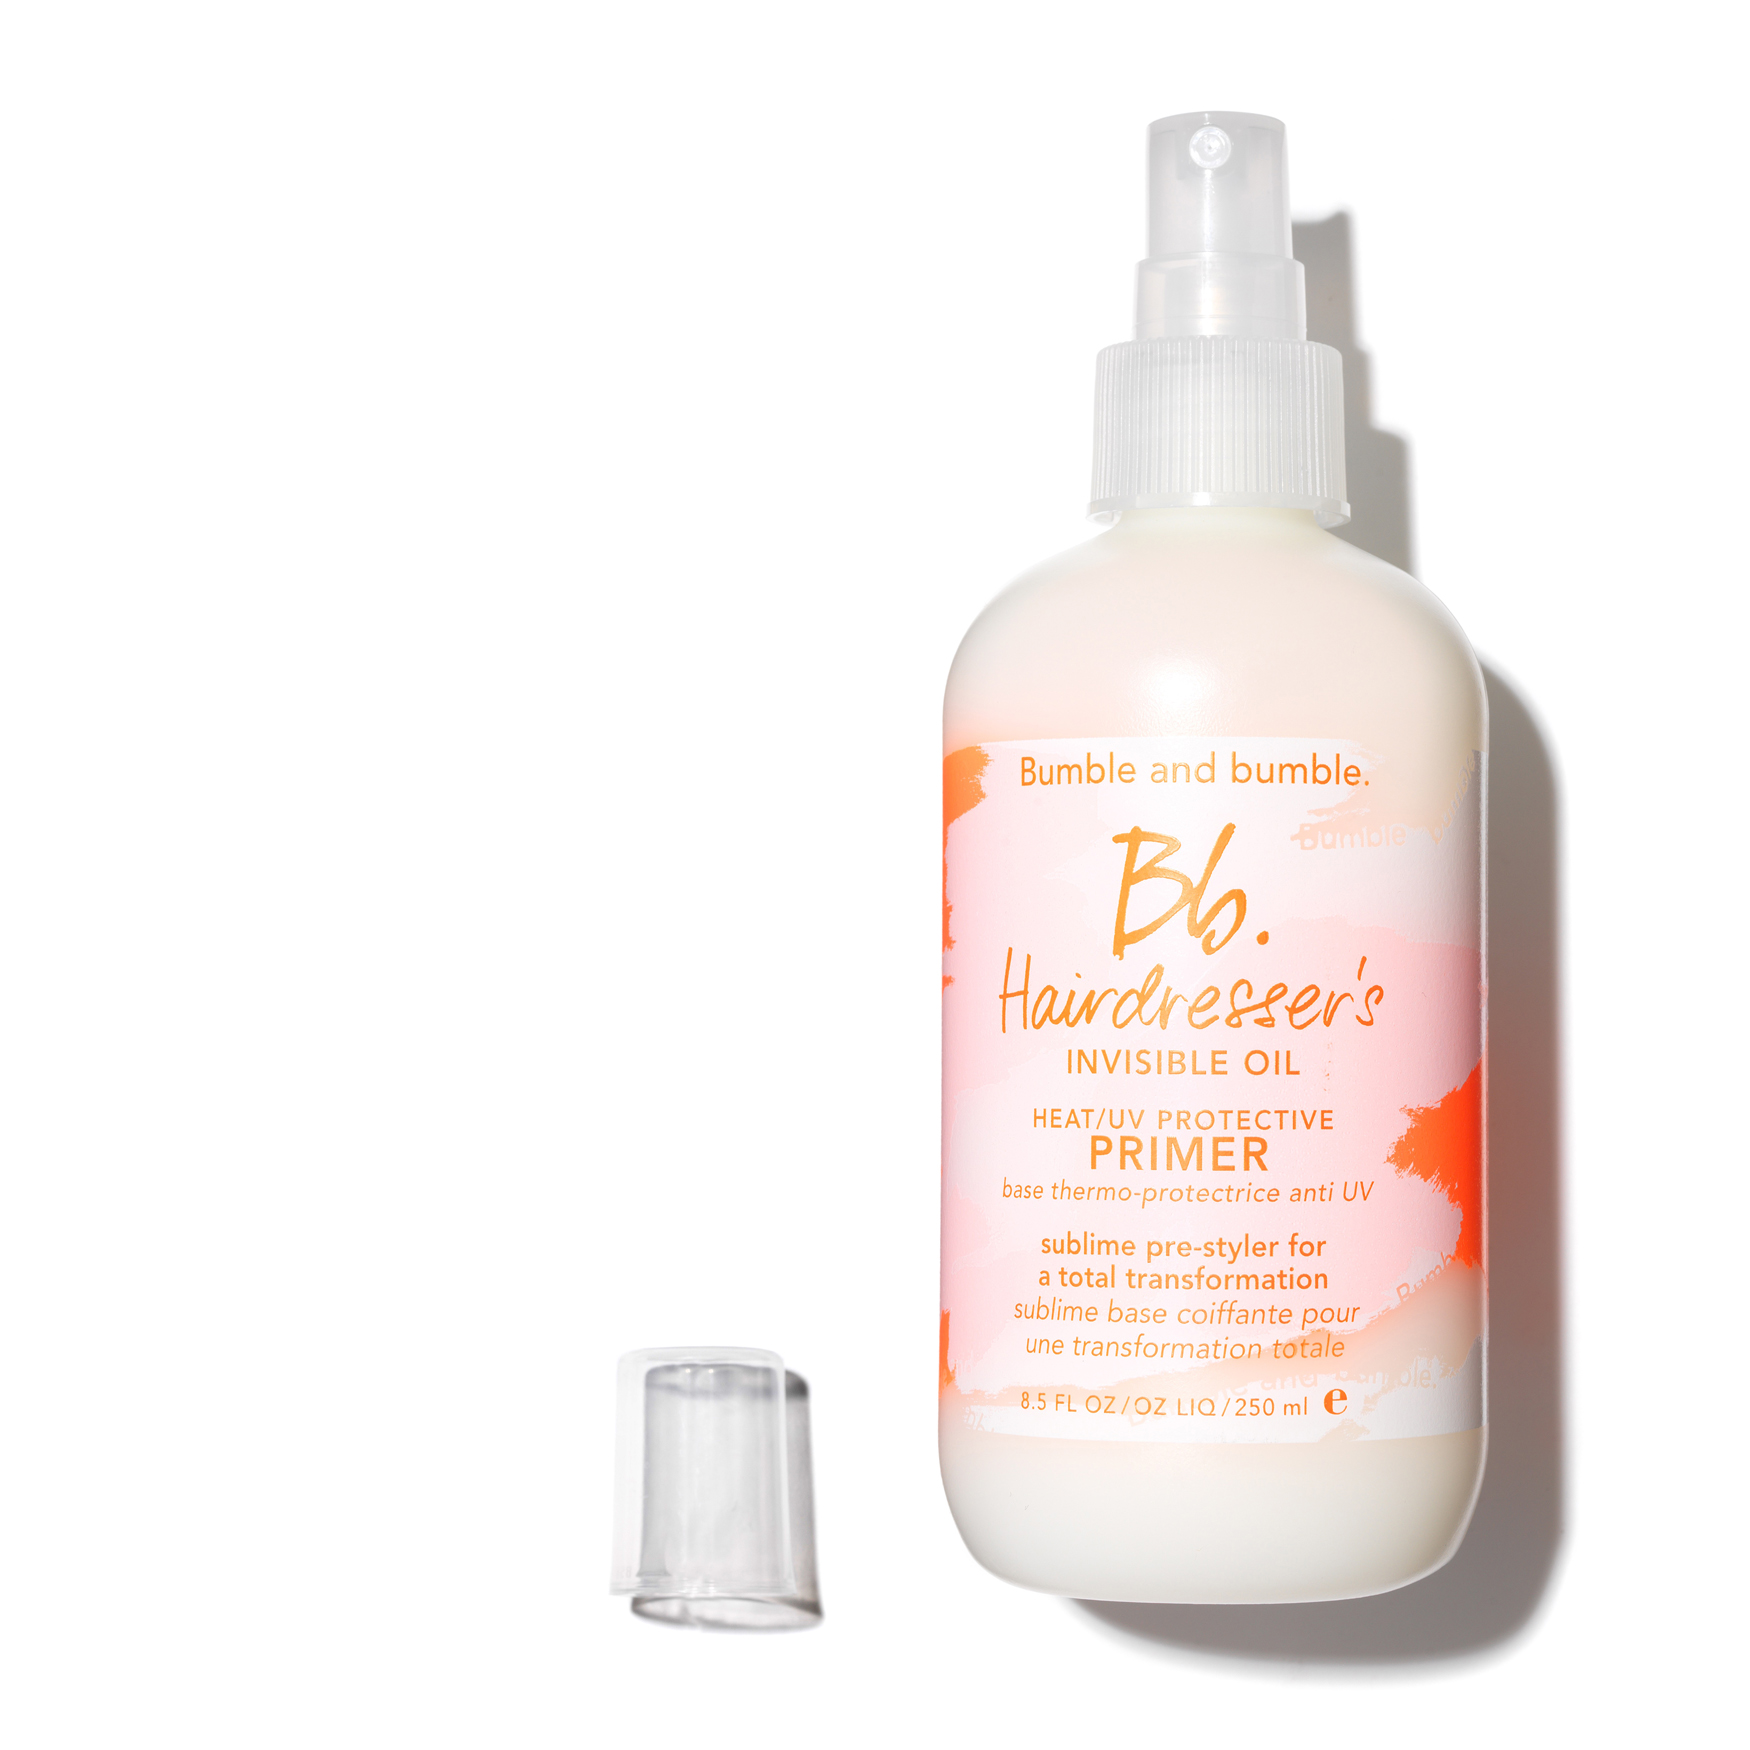 Bumble and Bumble Hairdresser's Invisible Oil Heat/UV Protective Primer |  Space NK